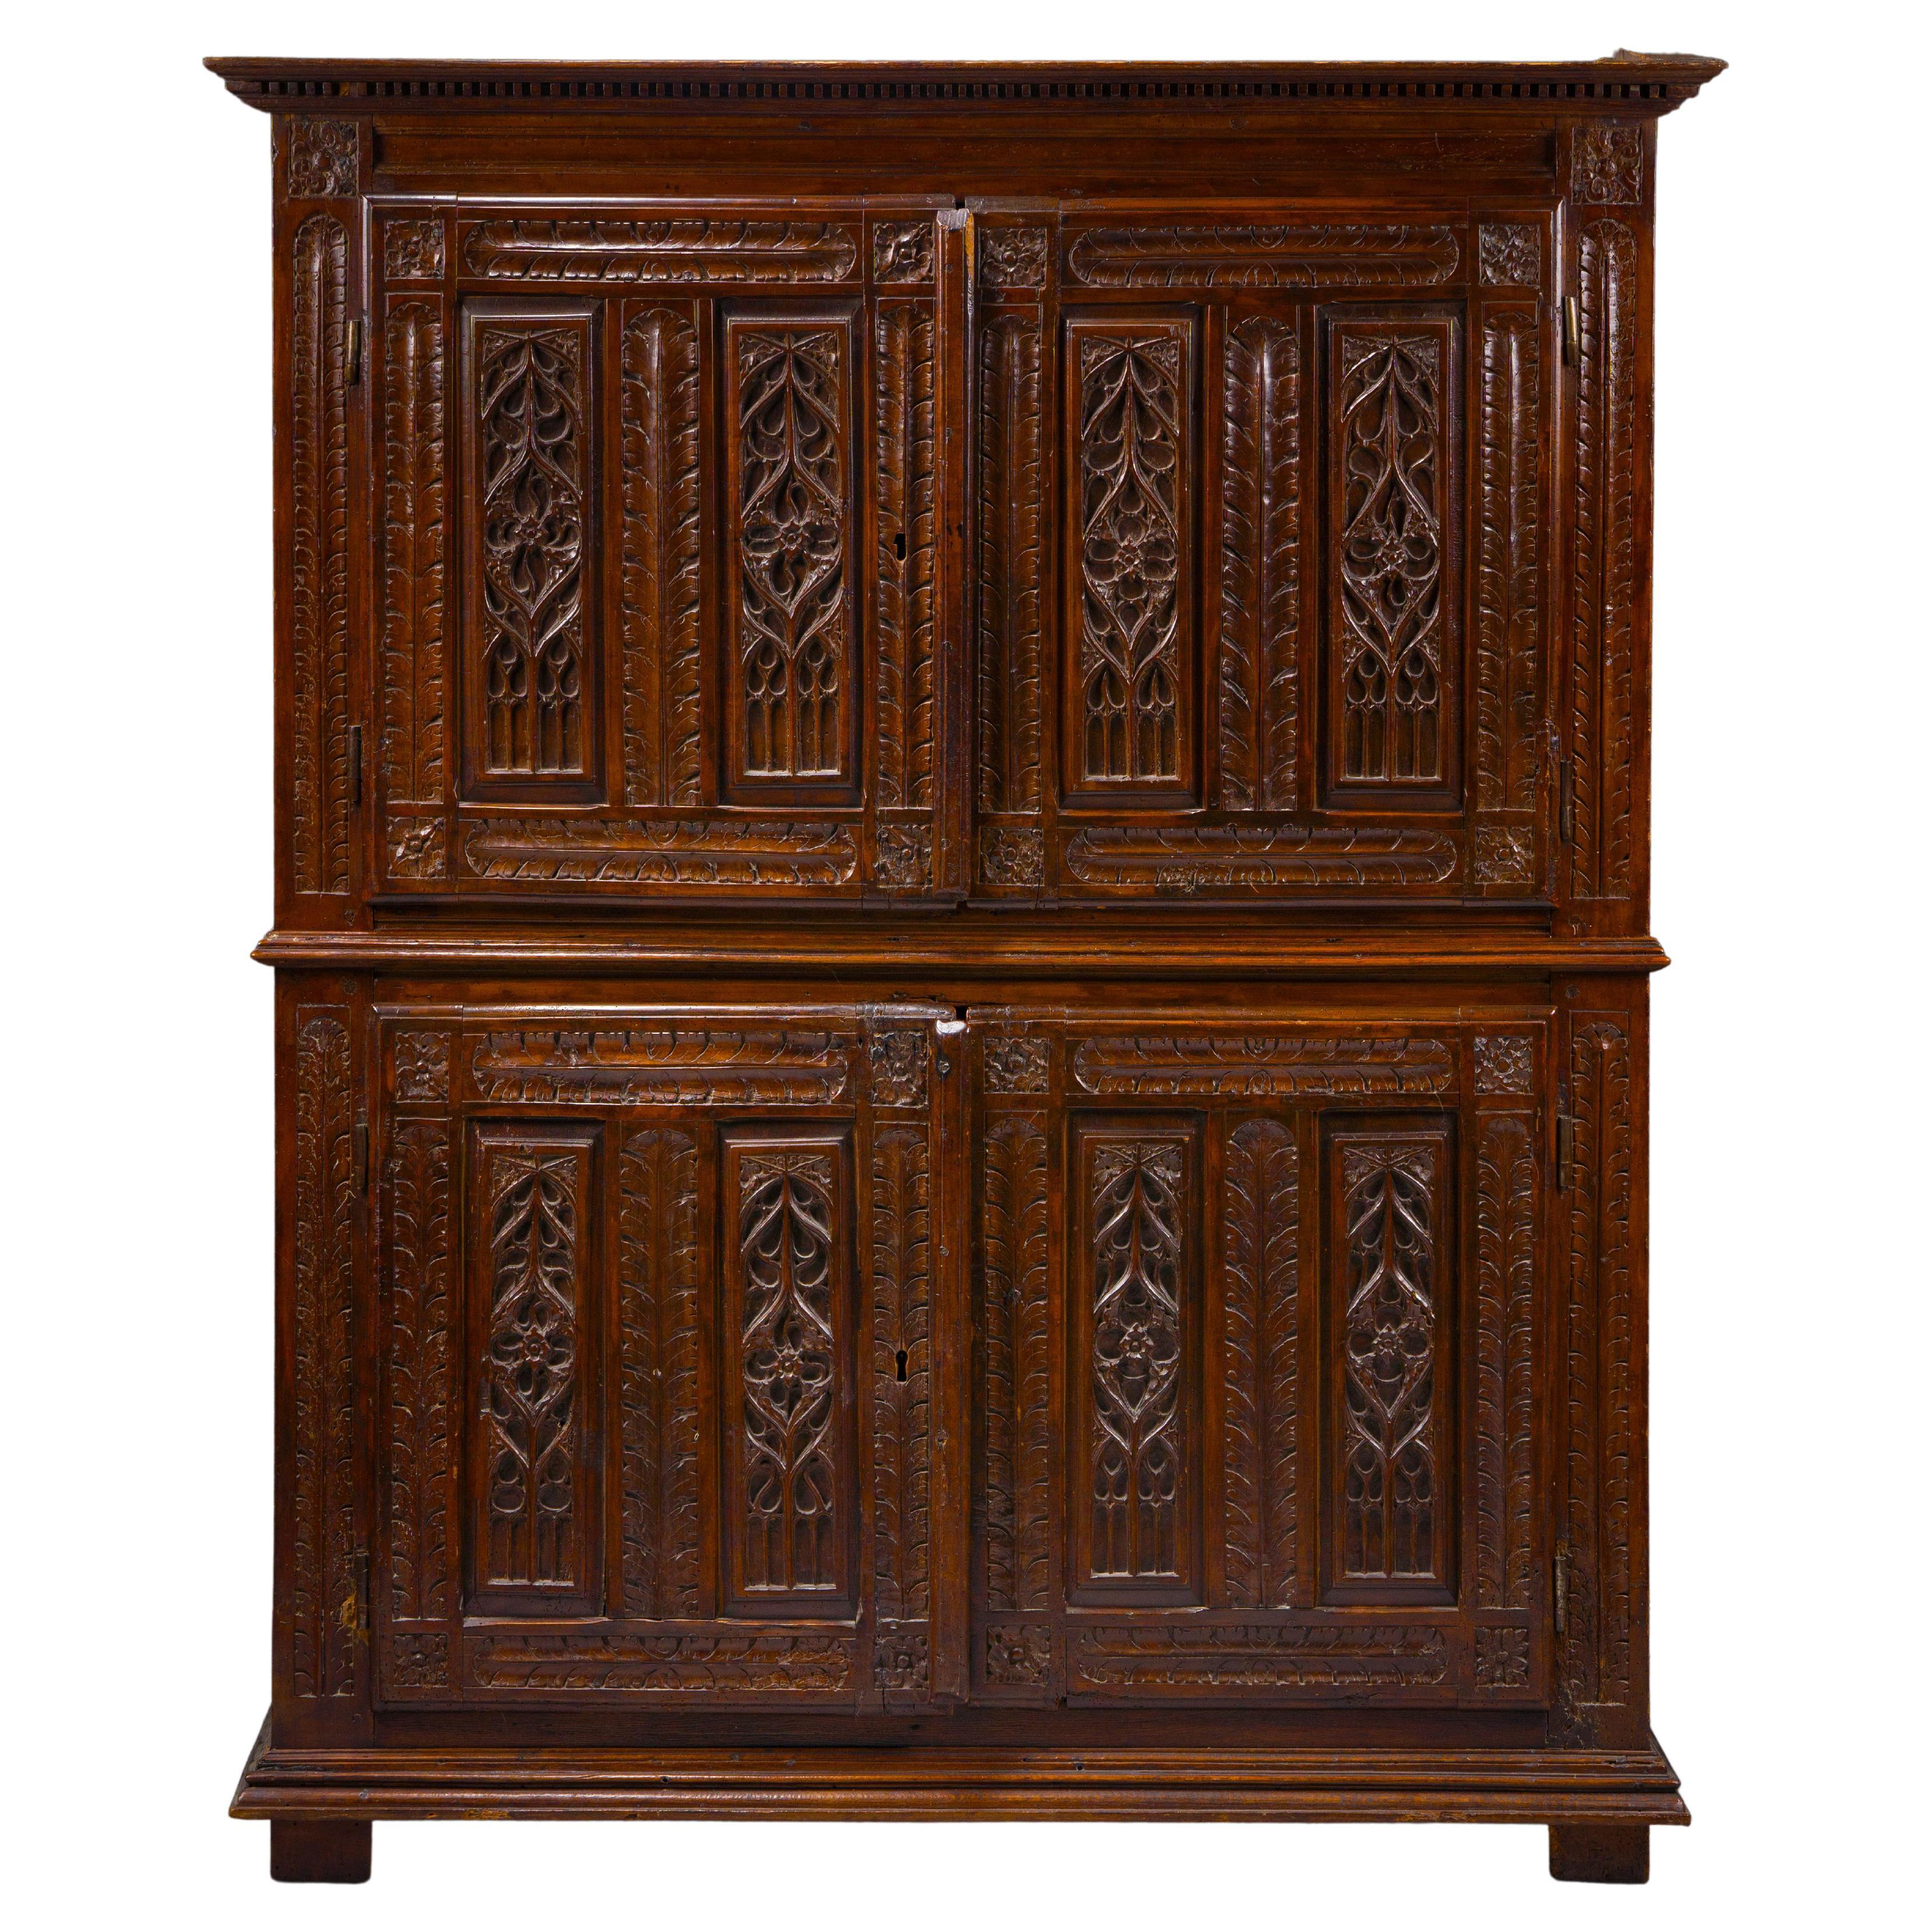 Rare Renaissance Cabinet with Feather quill and Fenestration Decoration